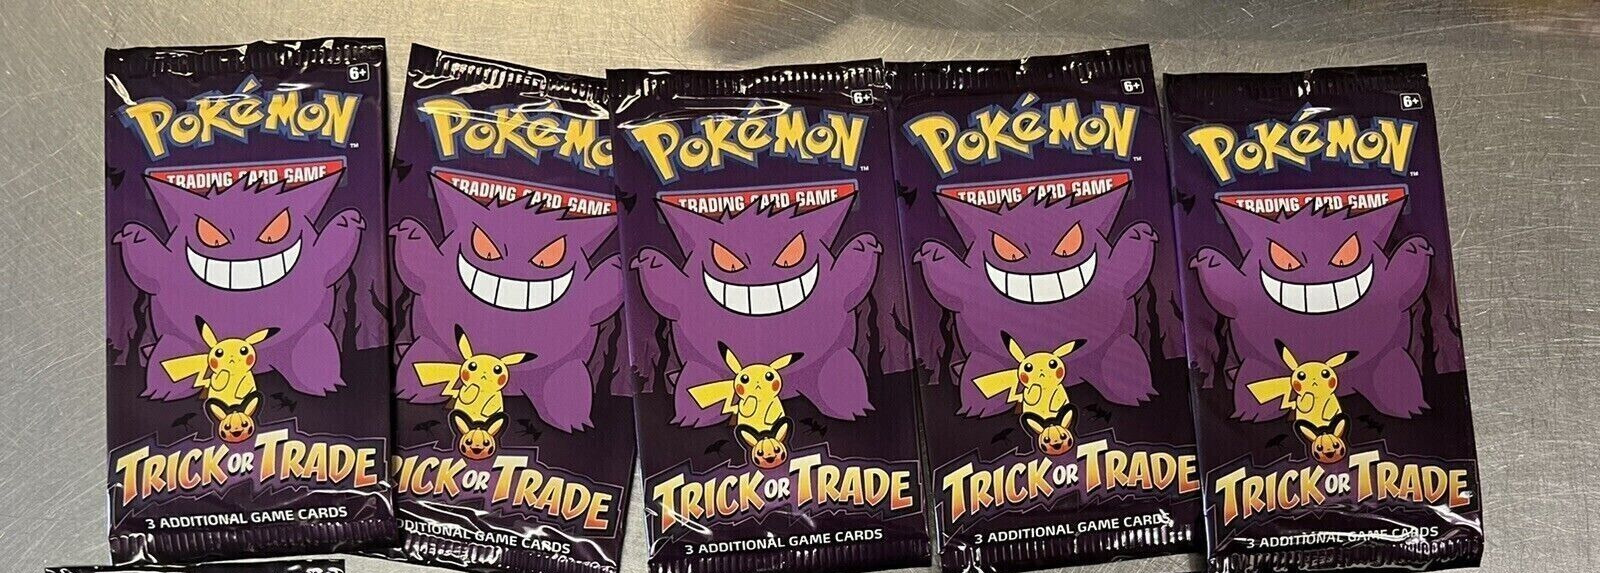 Pokemon TCG Halloween Trick or Trade Booster Bundle Lot Of 5 Packs (15 cards)